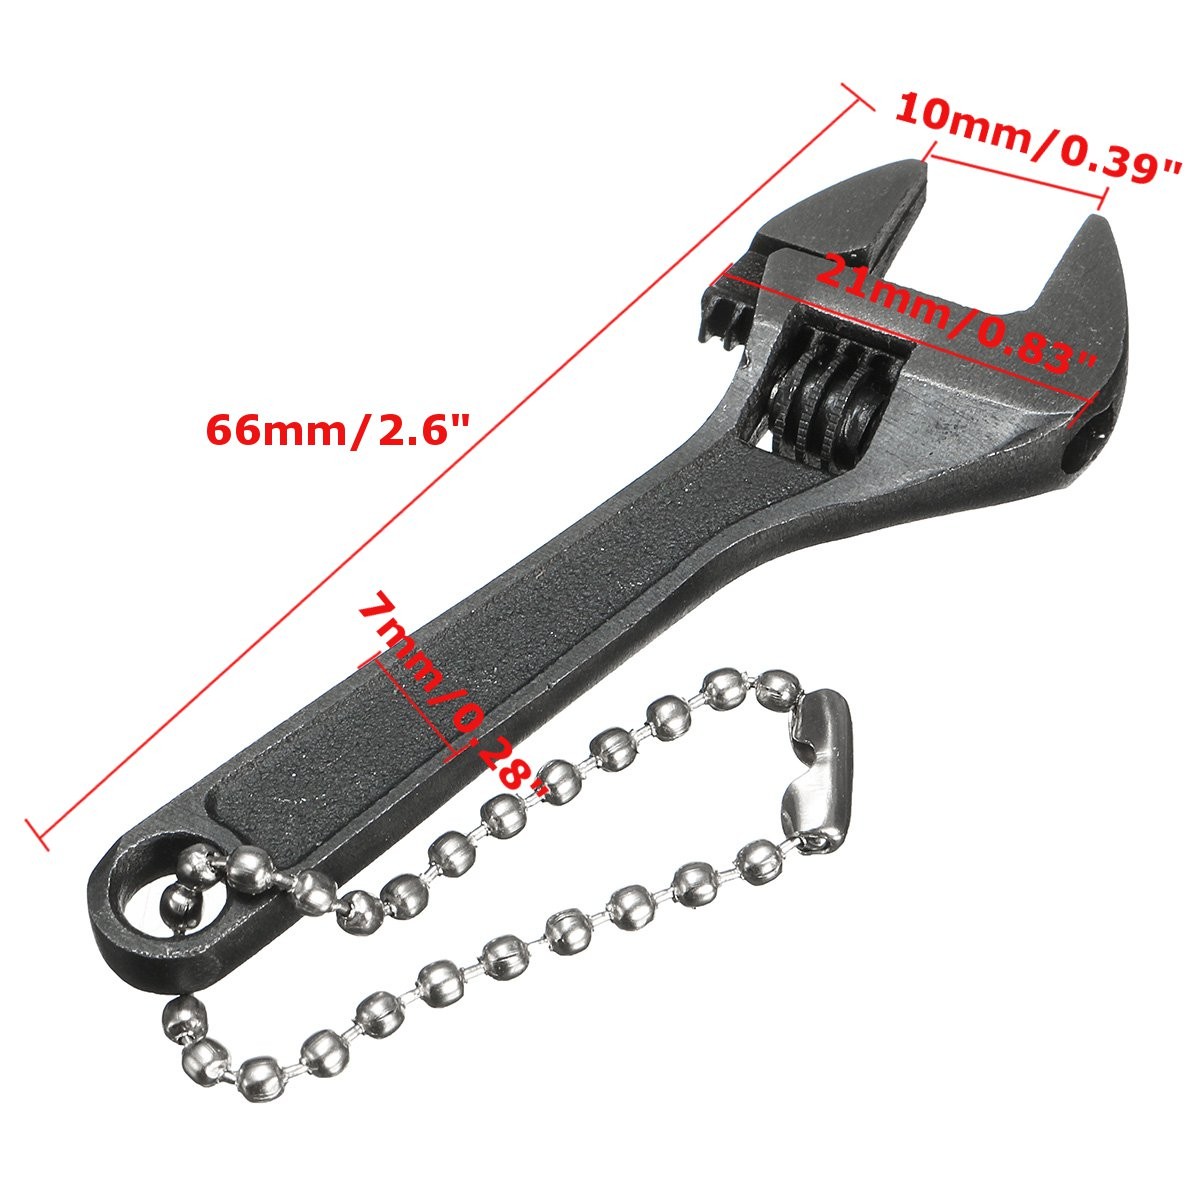 DANIU-66mm-26inch-Mini-Metal-Adjustable-Wrench-Spanner-Hand-Tool-0-10mm-Jaw-Wrench-Black-1199883-1